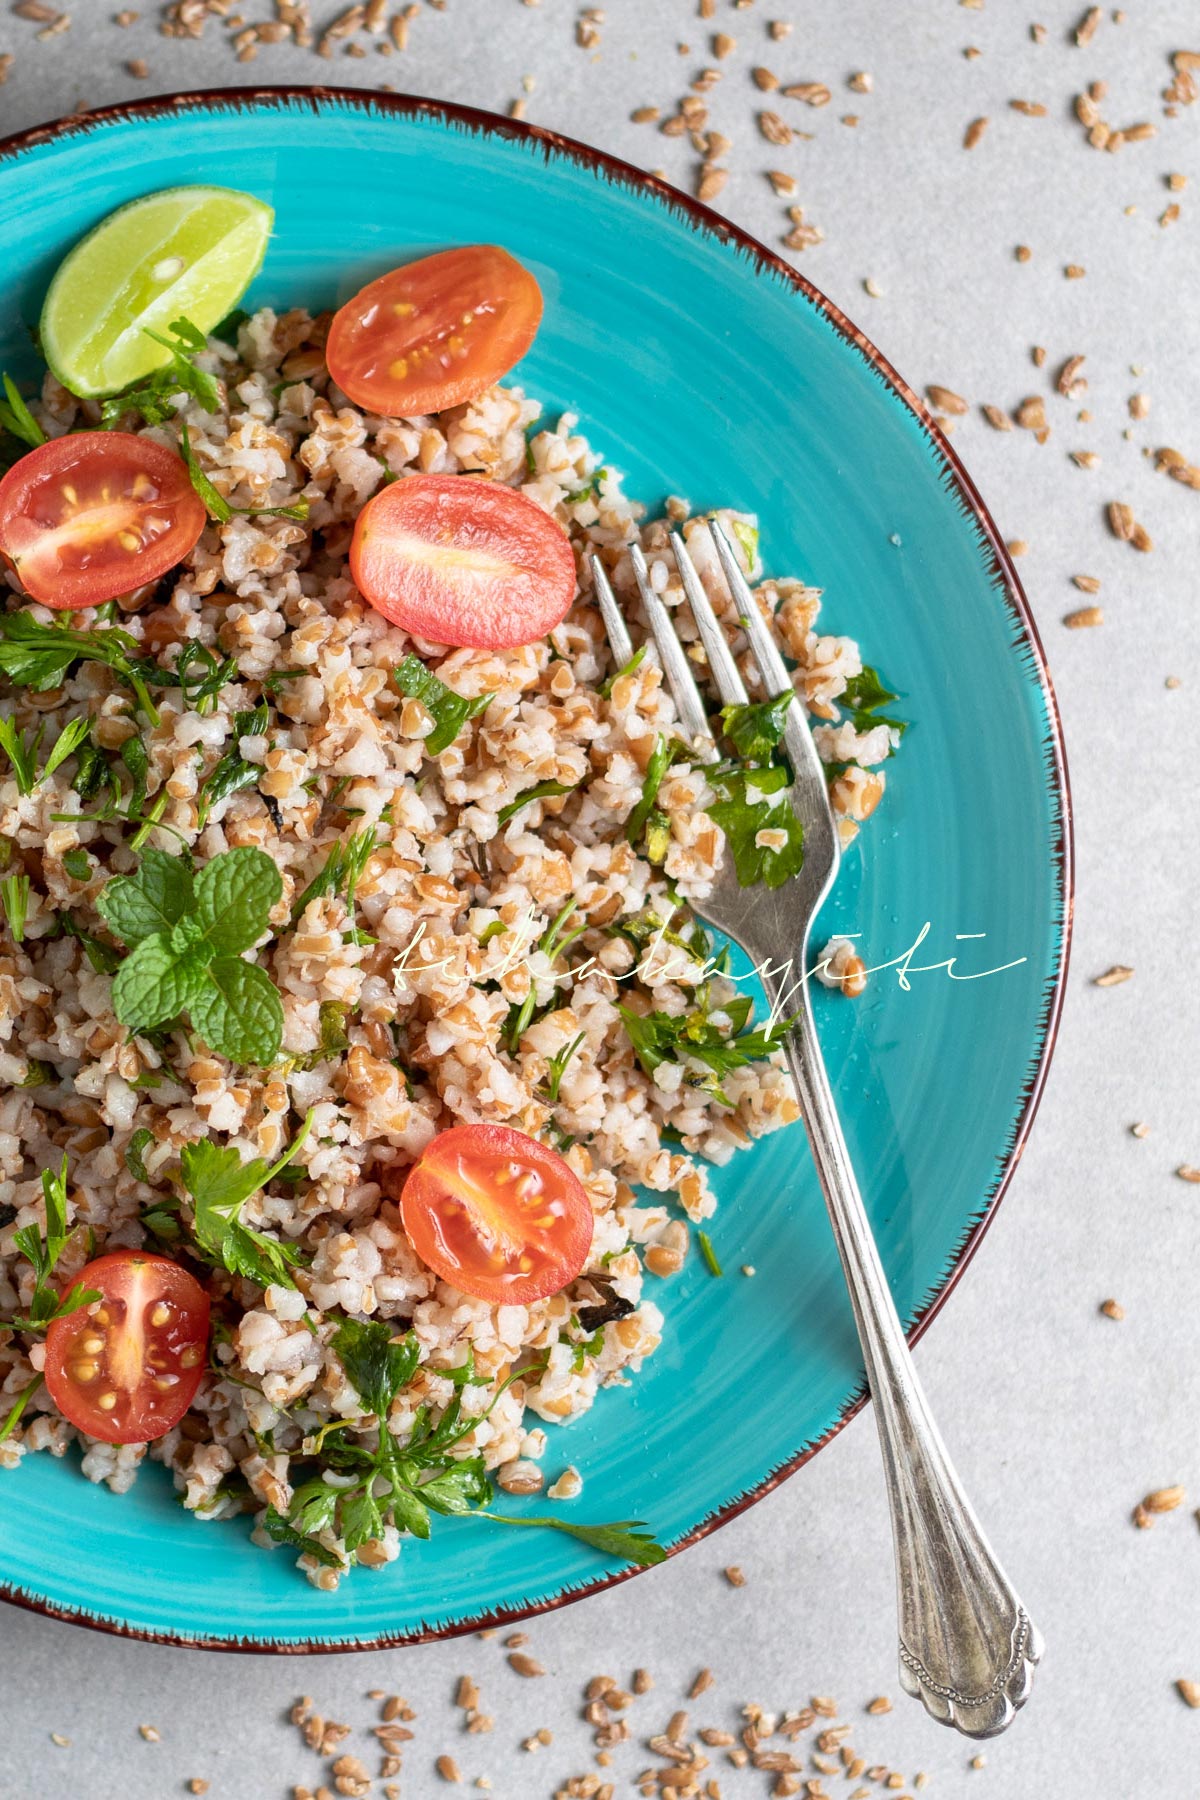 Infused with fresh parsley and peppermint leaves, this red bulgur salad is light and fluffy. And it's a breeze to make for a taste of Haiti. | tchakayiti.com